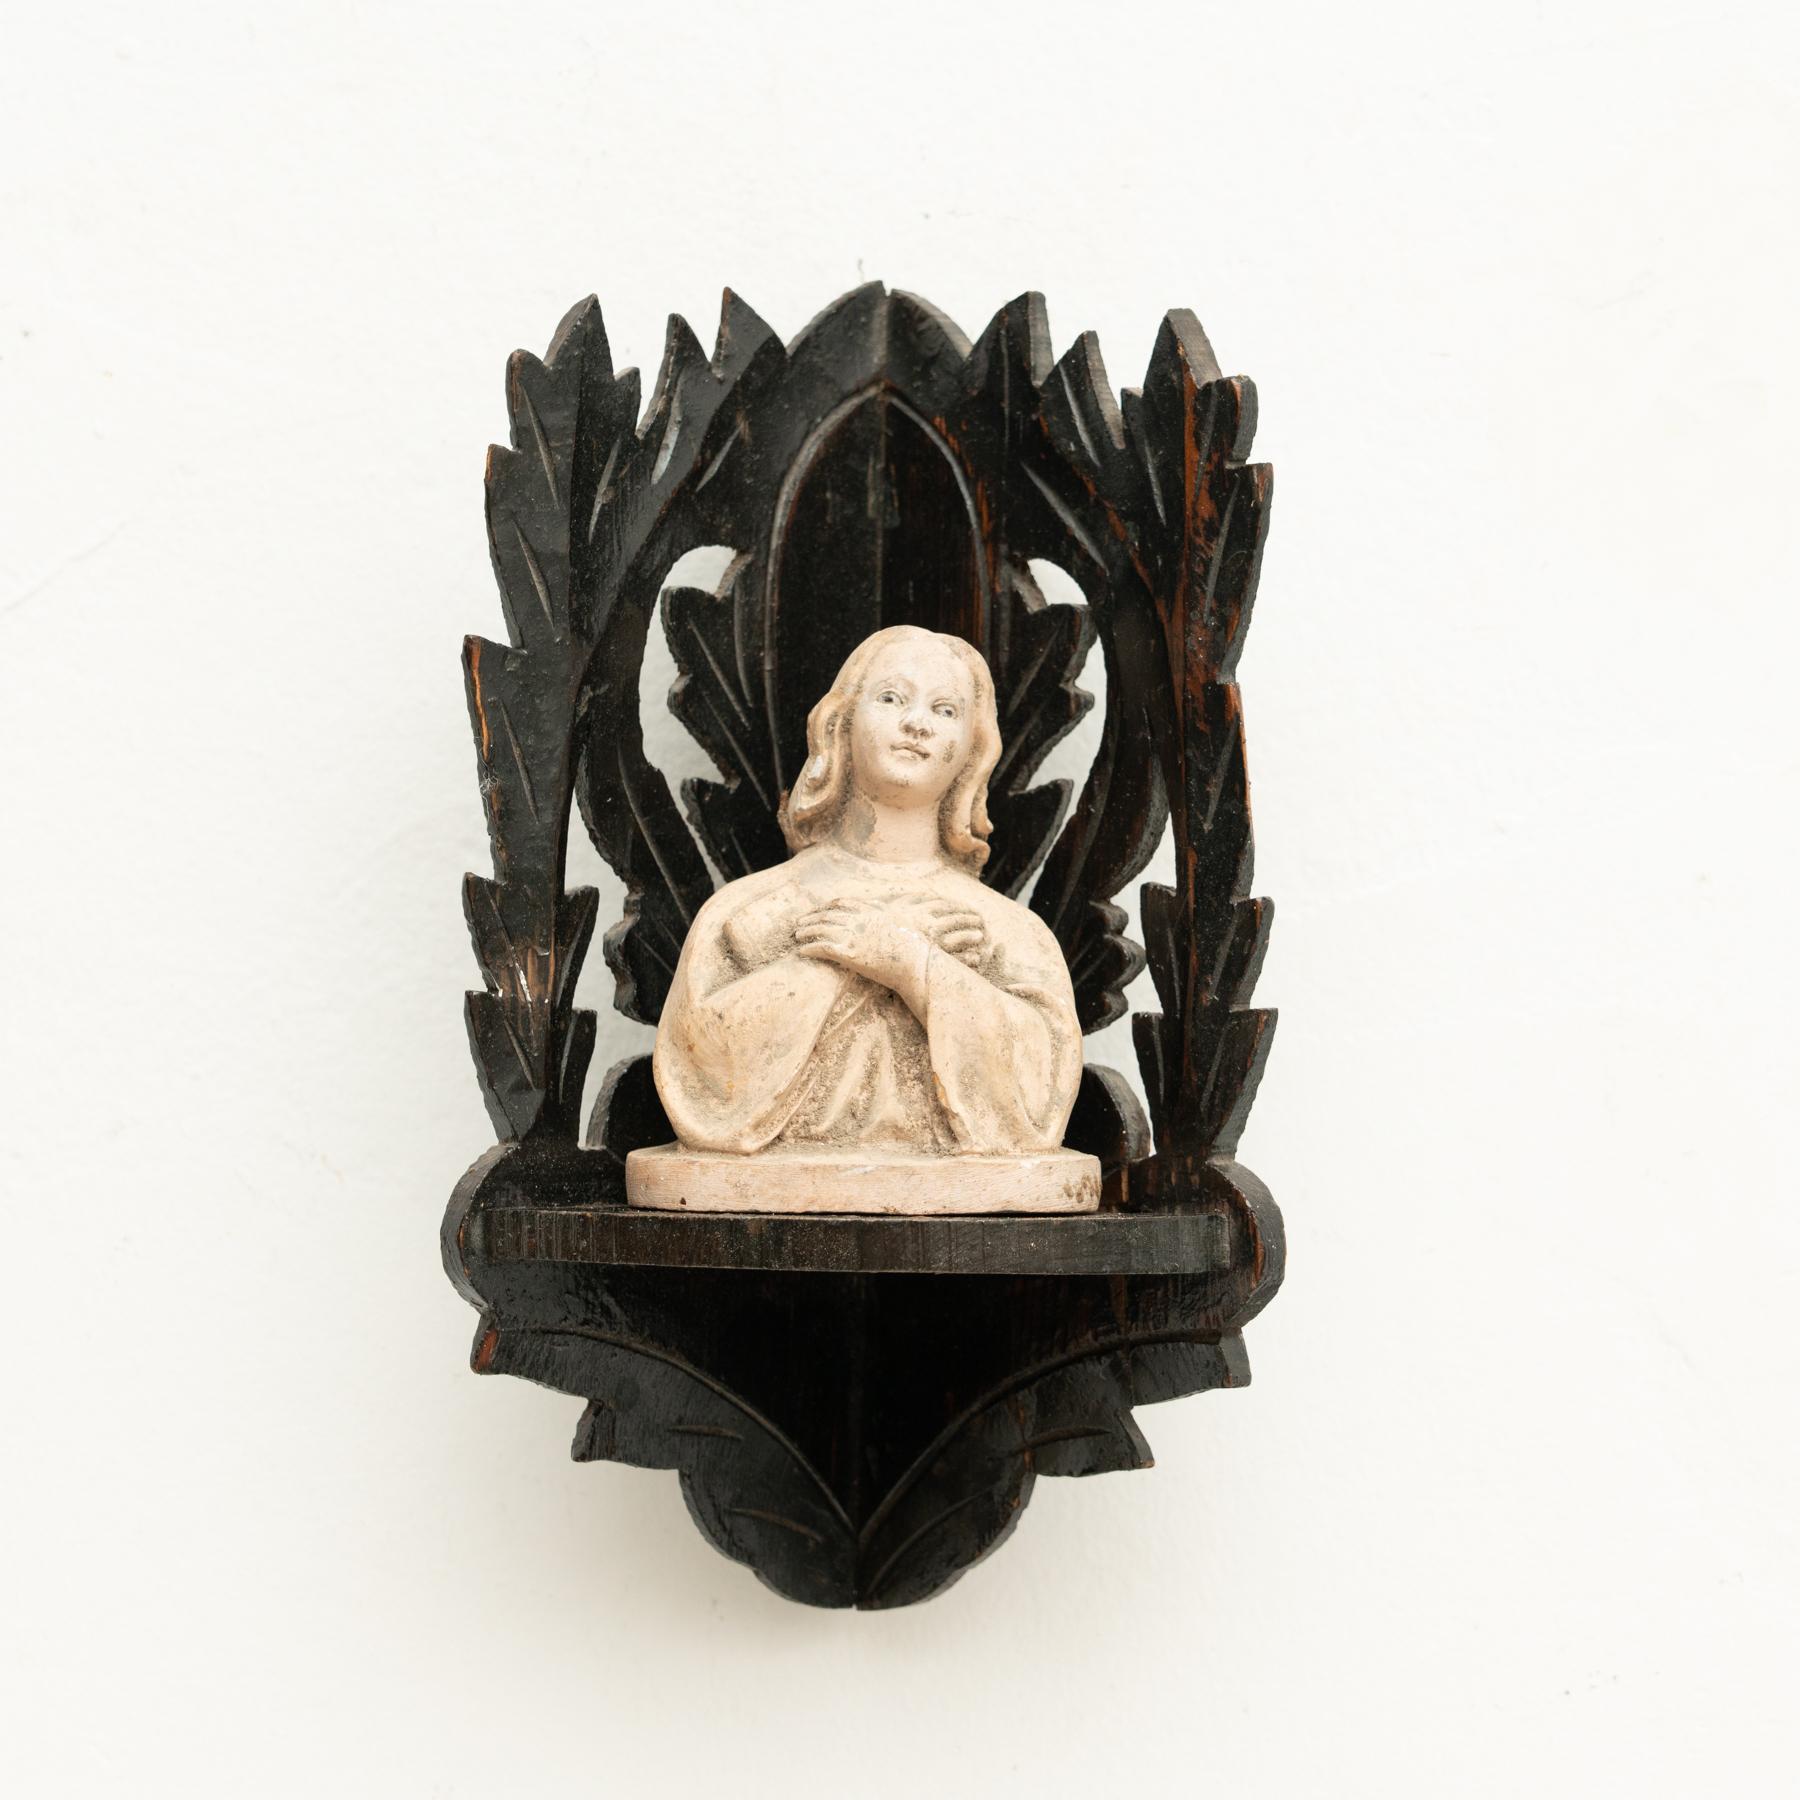 Traditional religious plaster figure of a virgin in a wooden altar.

Made in traditional Catalan atelier in Olot, Spain, circa 1950.

In original condition, with minor wear consistent with age and use, preserving a beautiful